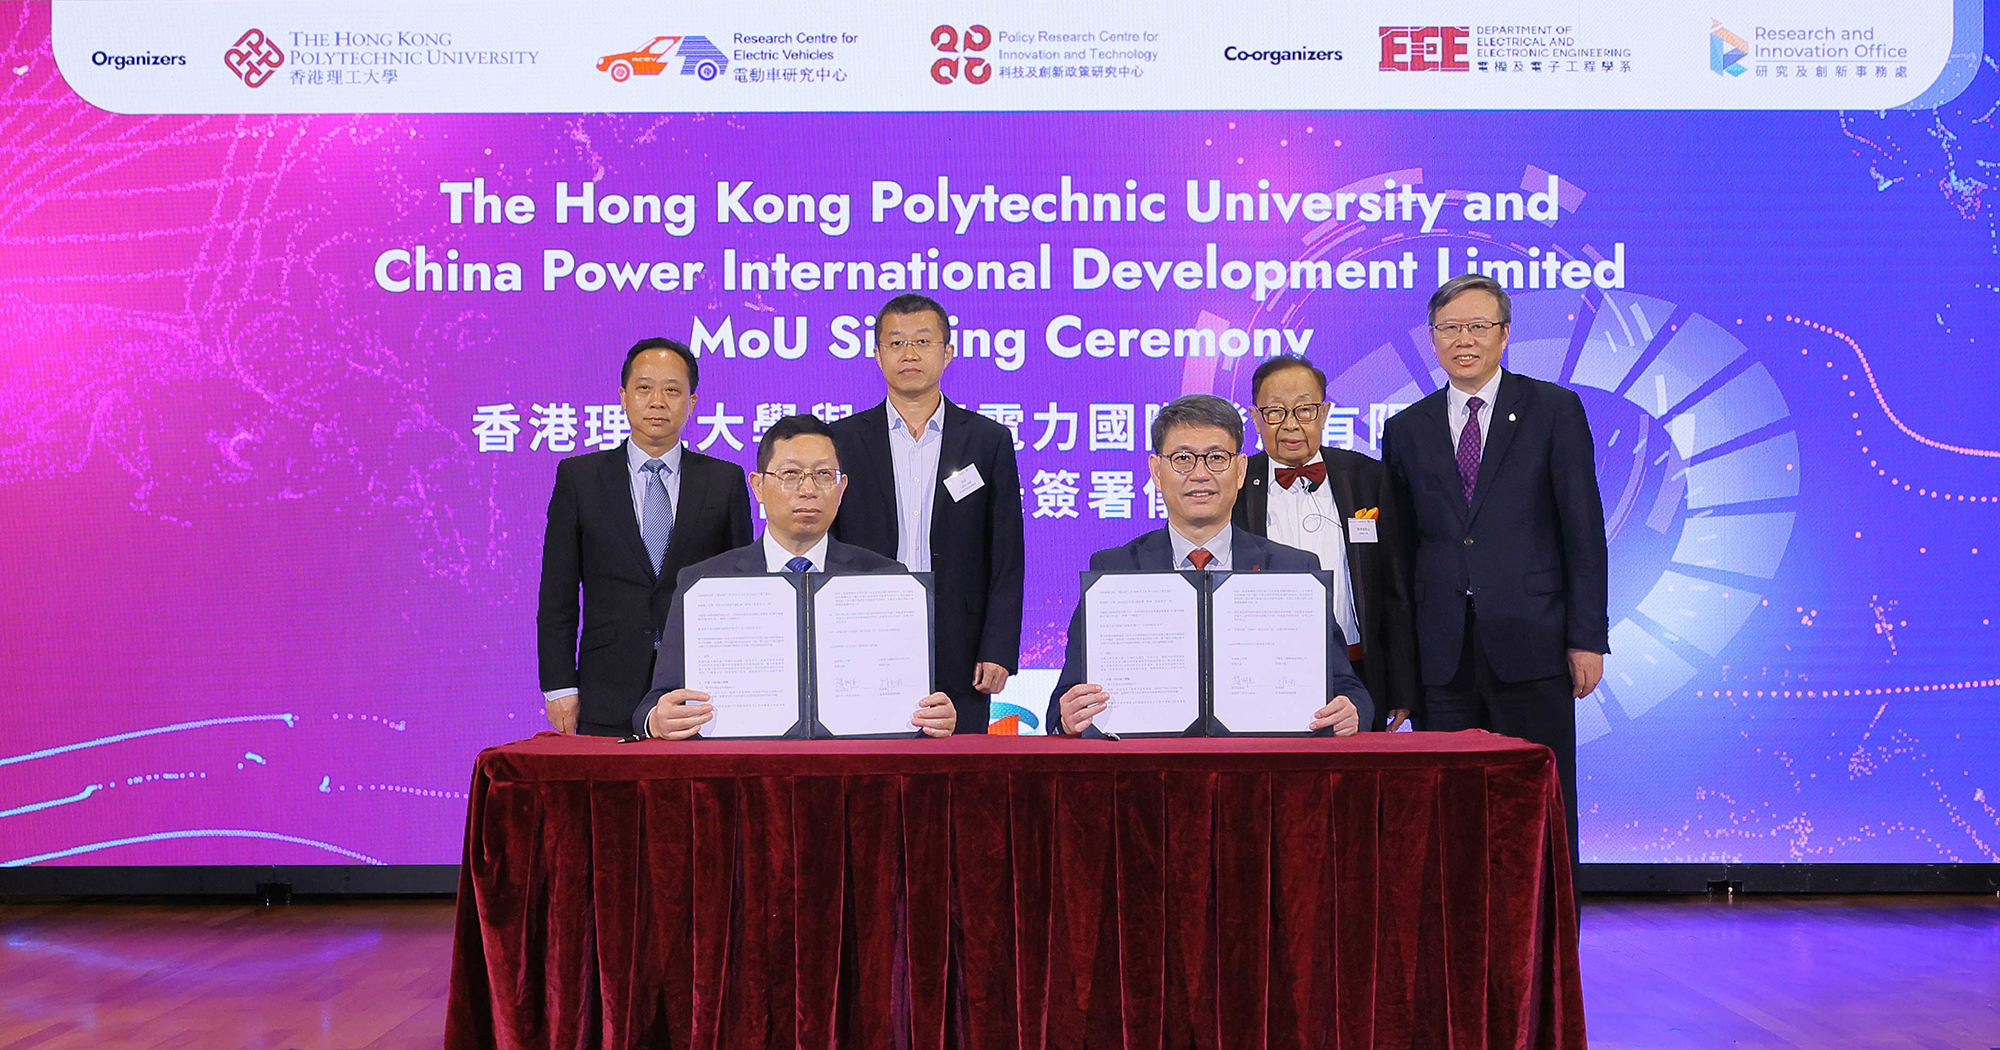 Witnessed by Prof. Jin-Guang Teng, PolyU President (1st from right, back row); Prof. C.C. Chan, RCEV Director (2nd from right, back row), Mr Ye Shuiqiu, Deputy Director-General, Department of Educational, Scientific and Technological Affairs, Liaison Office of the Central People’s Government in the HKSAR (1st from left, back row); and Mr Chang FANG, Senior Manager, China Power International Development Limited (2nd from left, back row), an MoU was signed by Prof. Christopher Chao, PolyU Vice President (Research and Innovation) and Director of the Policy Research Centre for Innovation and Technology (right, front row) ; and Mr Weikang LIN, General Manager, China Power International Development Limited (left, front row).